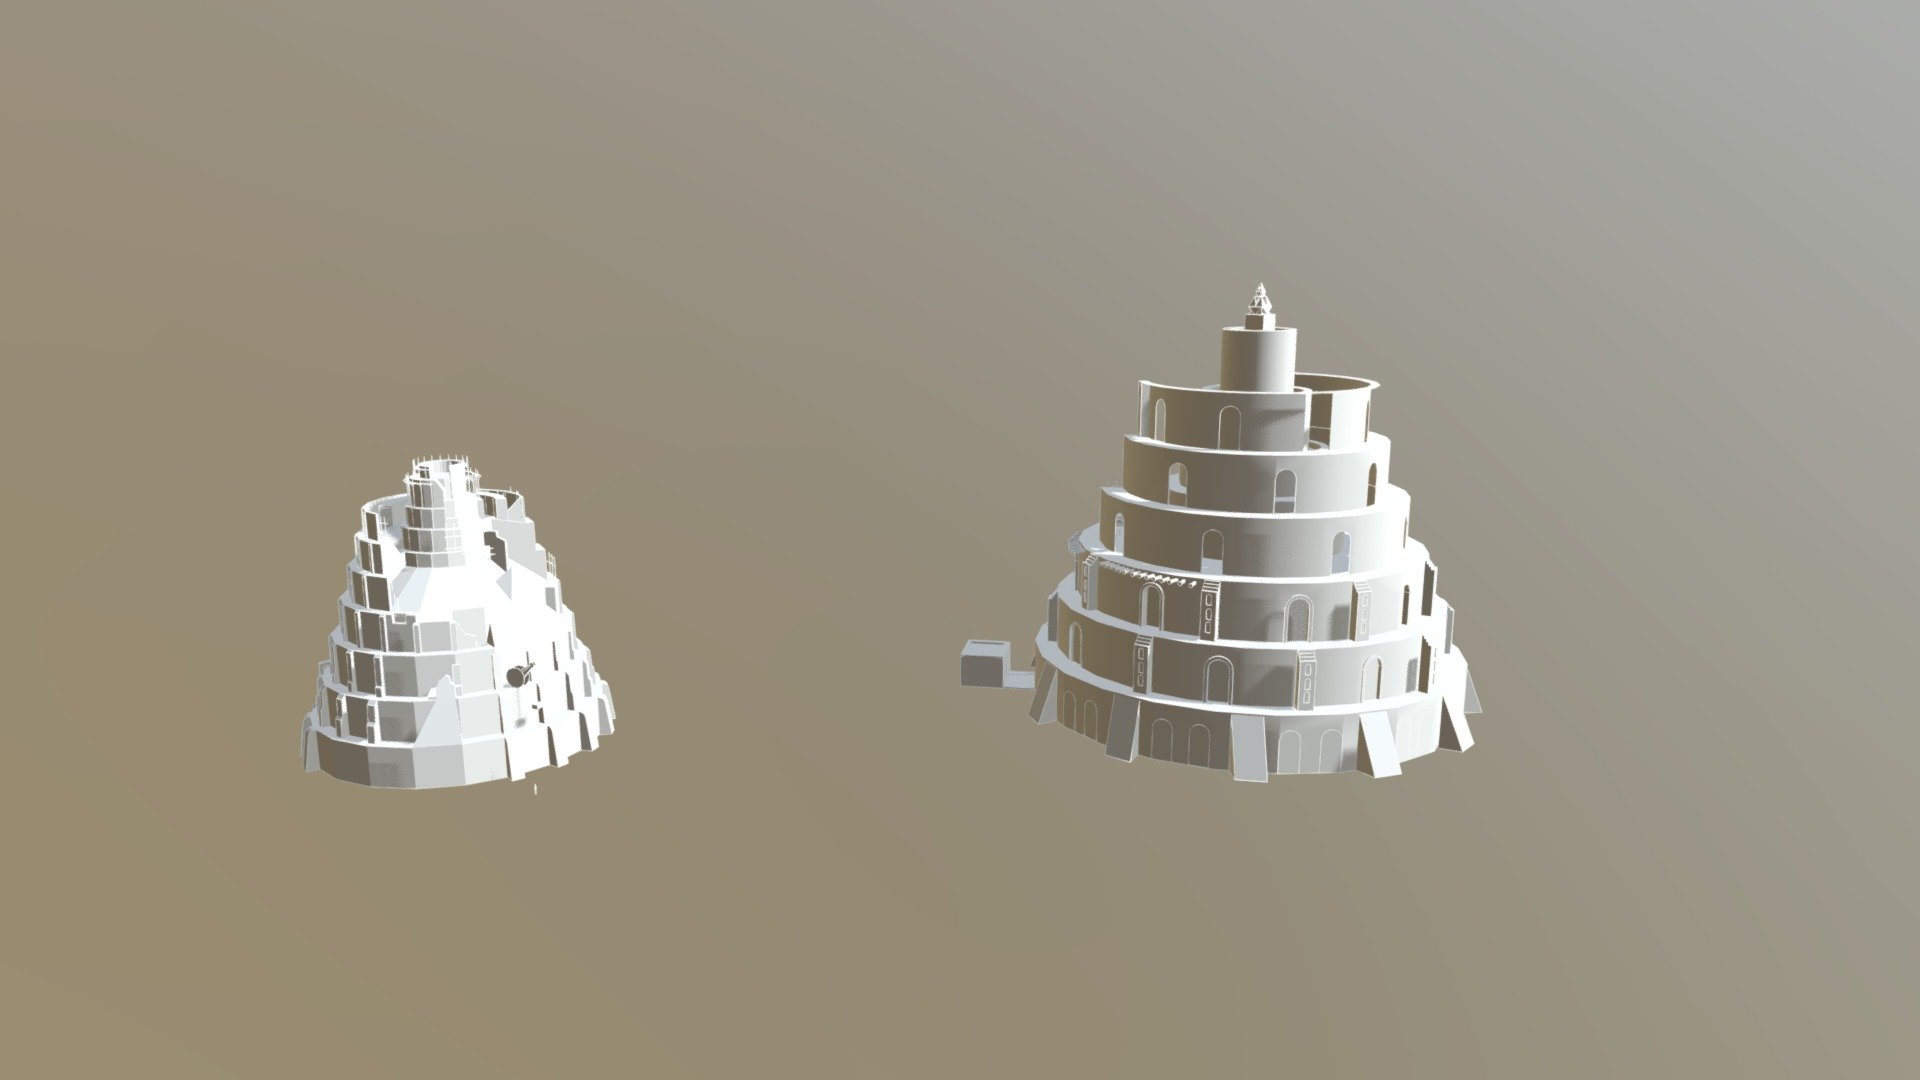 designs for the “Life of Daniel” movie - Tower of Babel - 3D model by ARmediaLab (@Daryl.Gungadoo) 3d model